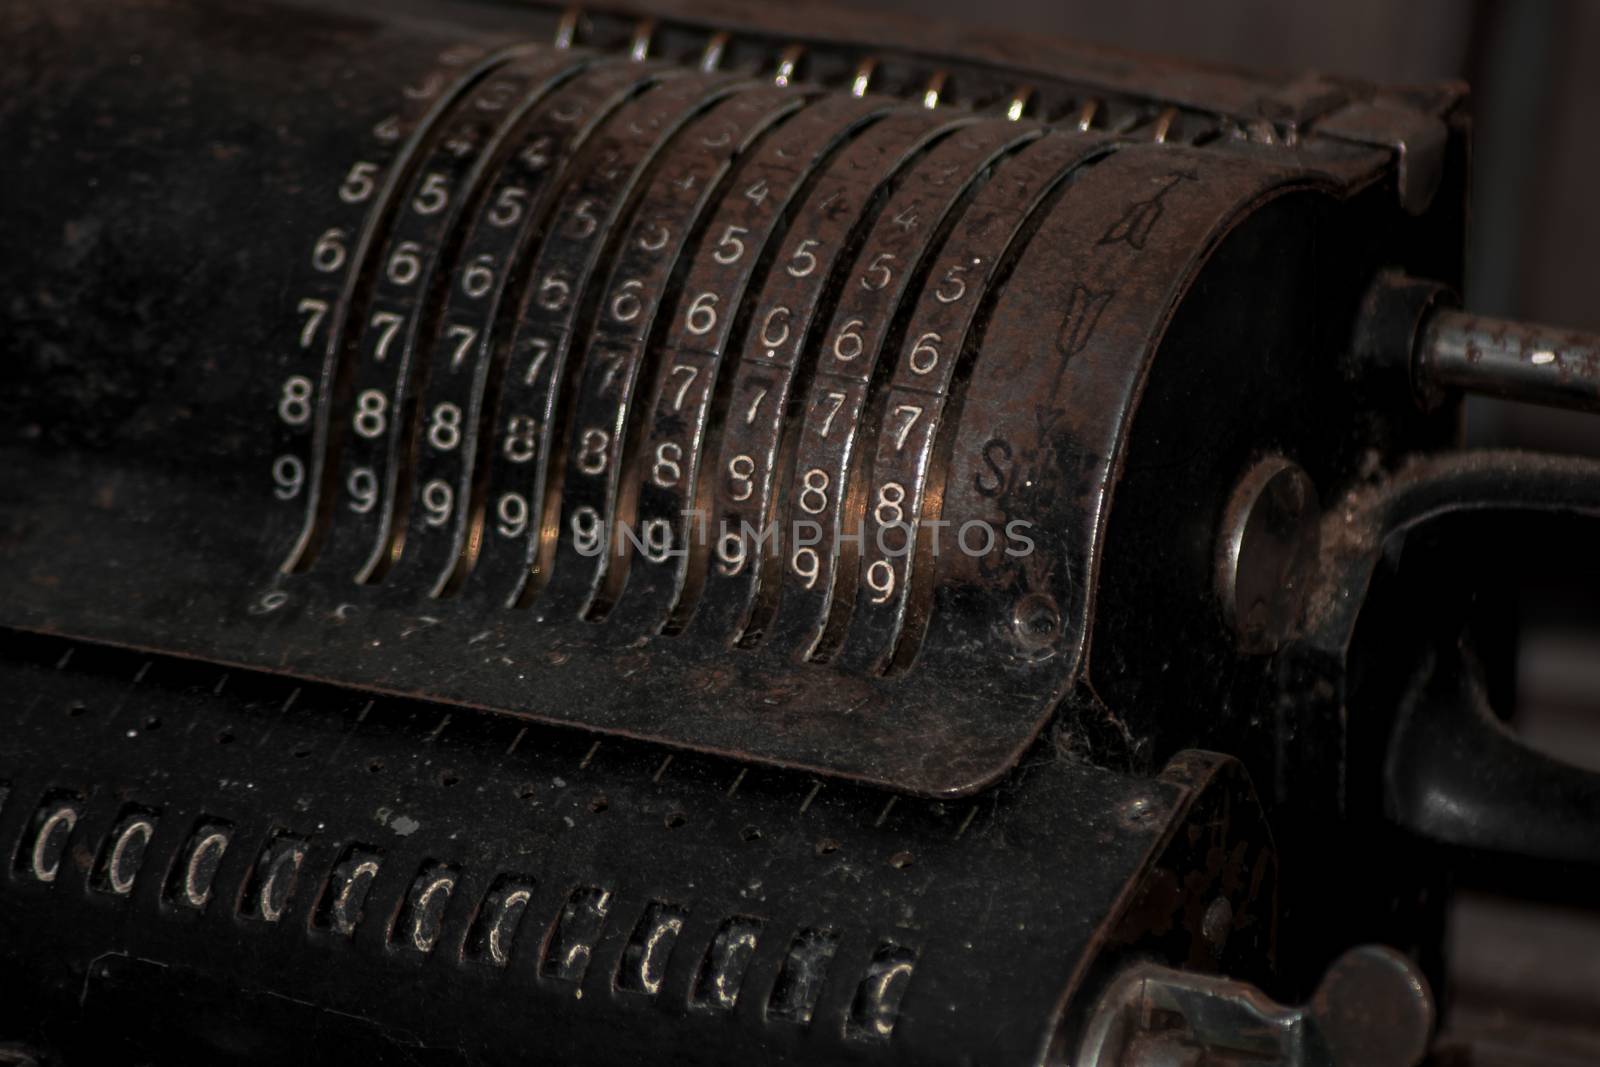 An old vintage cash register with lots of numbers by arvidnorberg